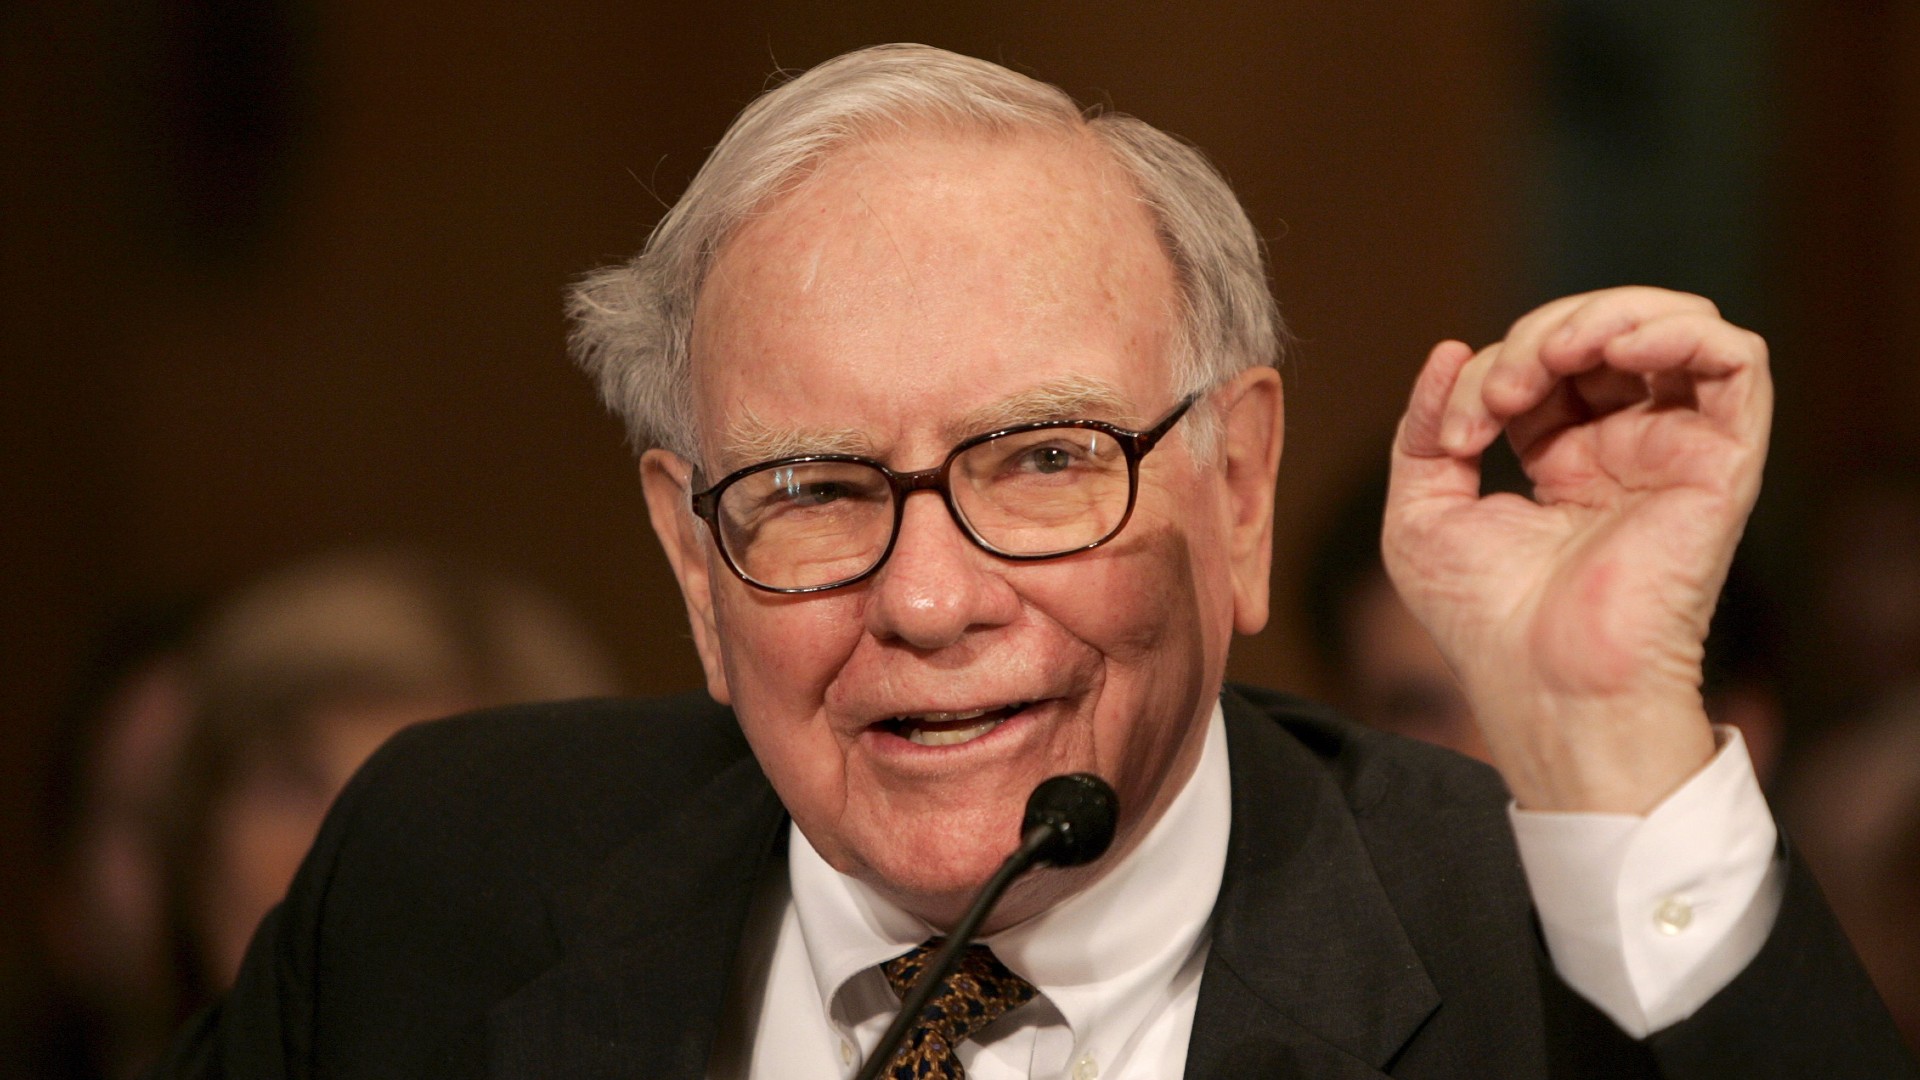 how to, amazon, warren buffett: how to know if a stock is overvalued